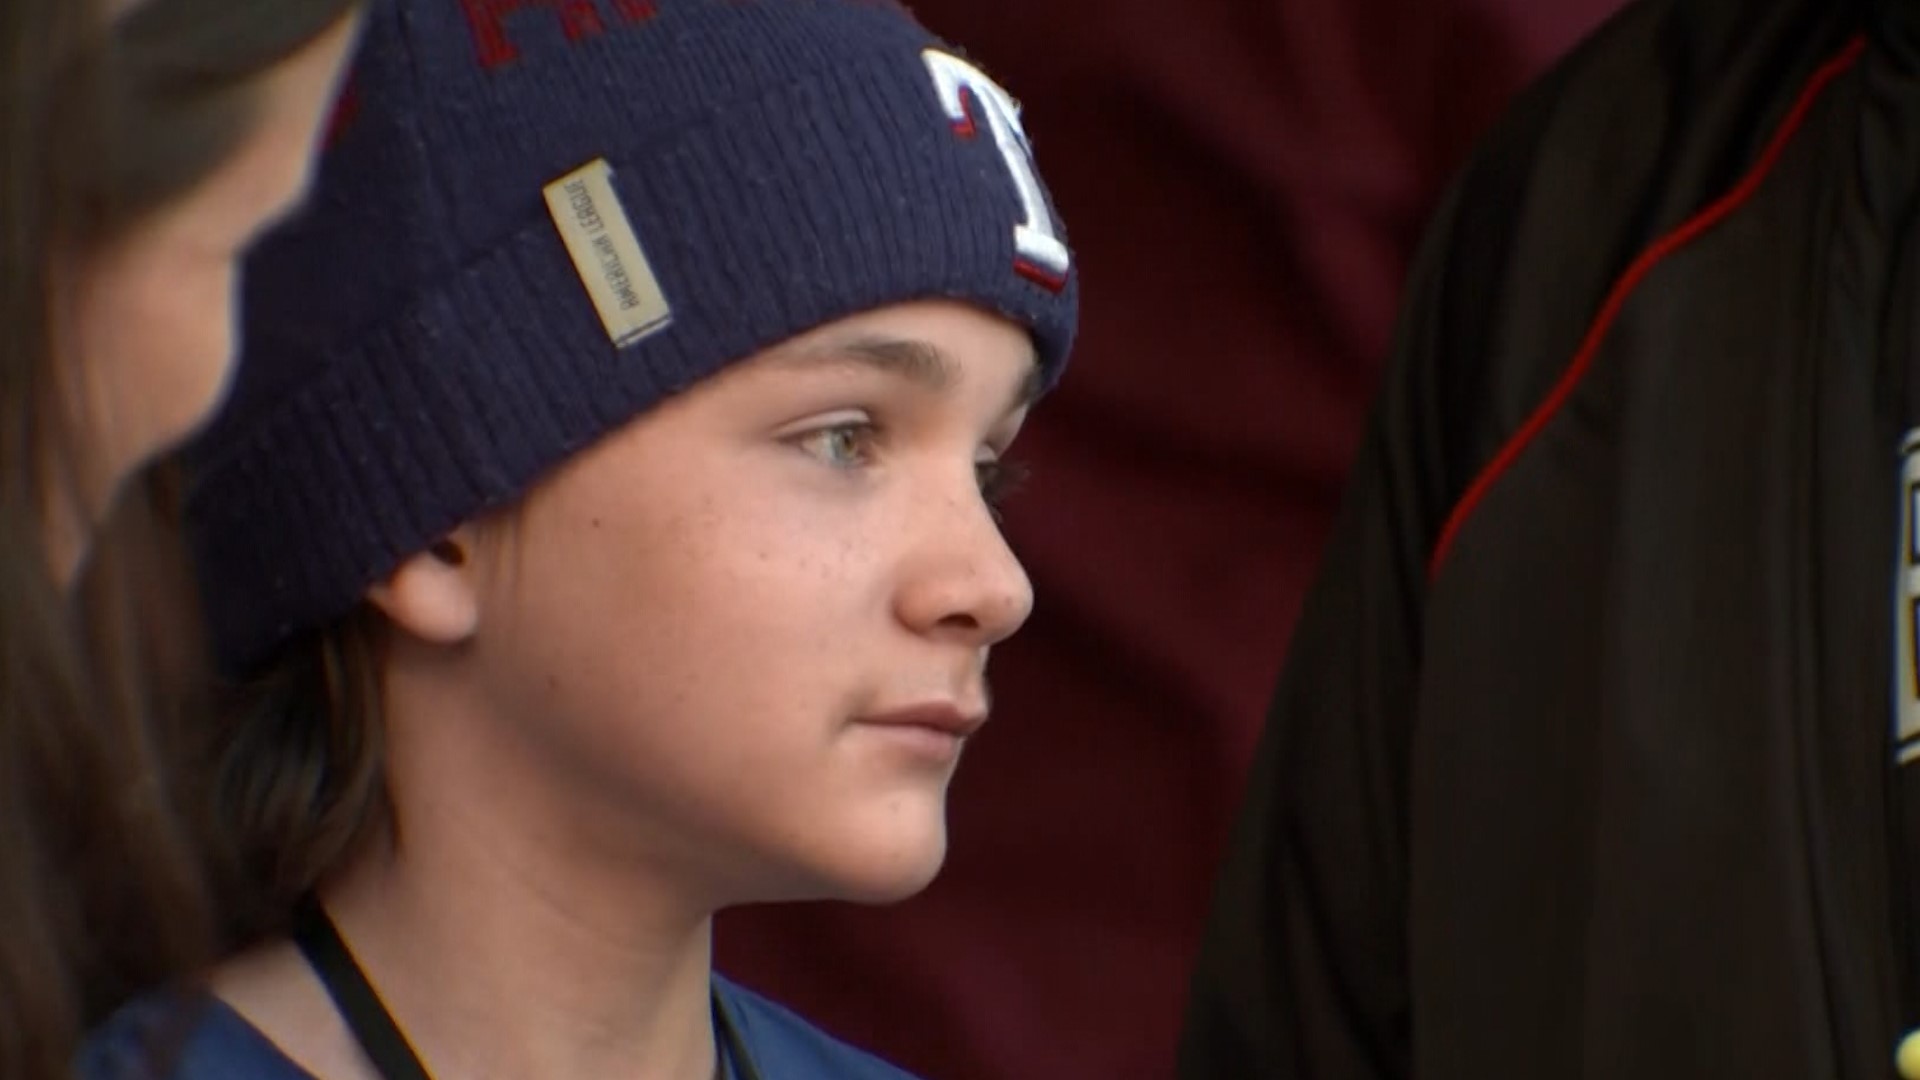 Maddox Carmean is a 13-year-old boy who has gone through two bone marrow transplants. He is throwing out the honorary first pitch Tuesday at the World Series.